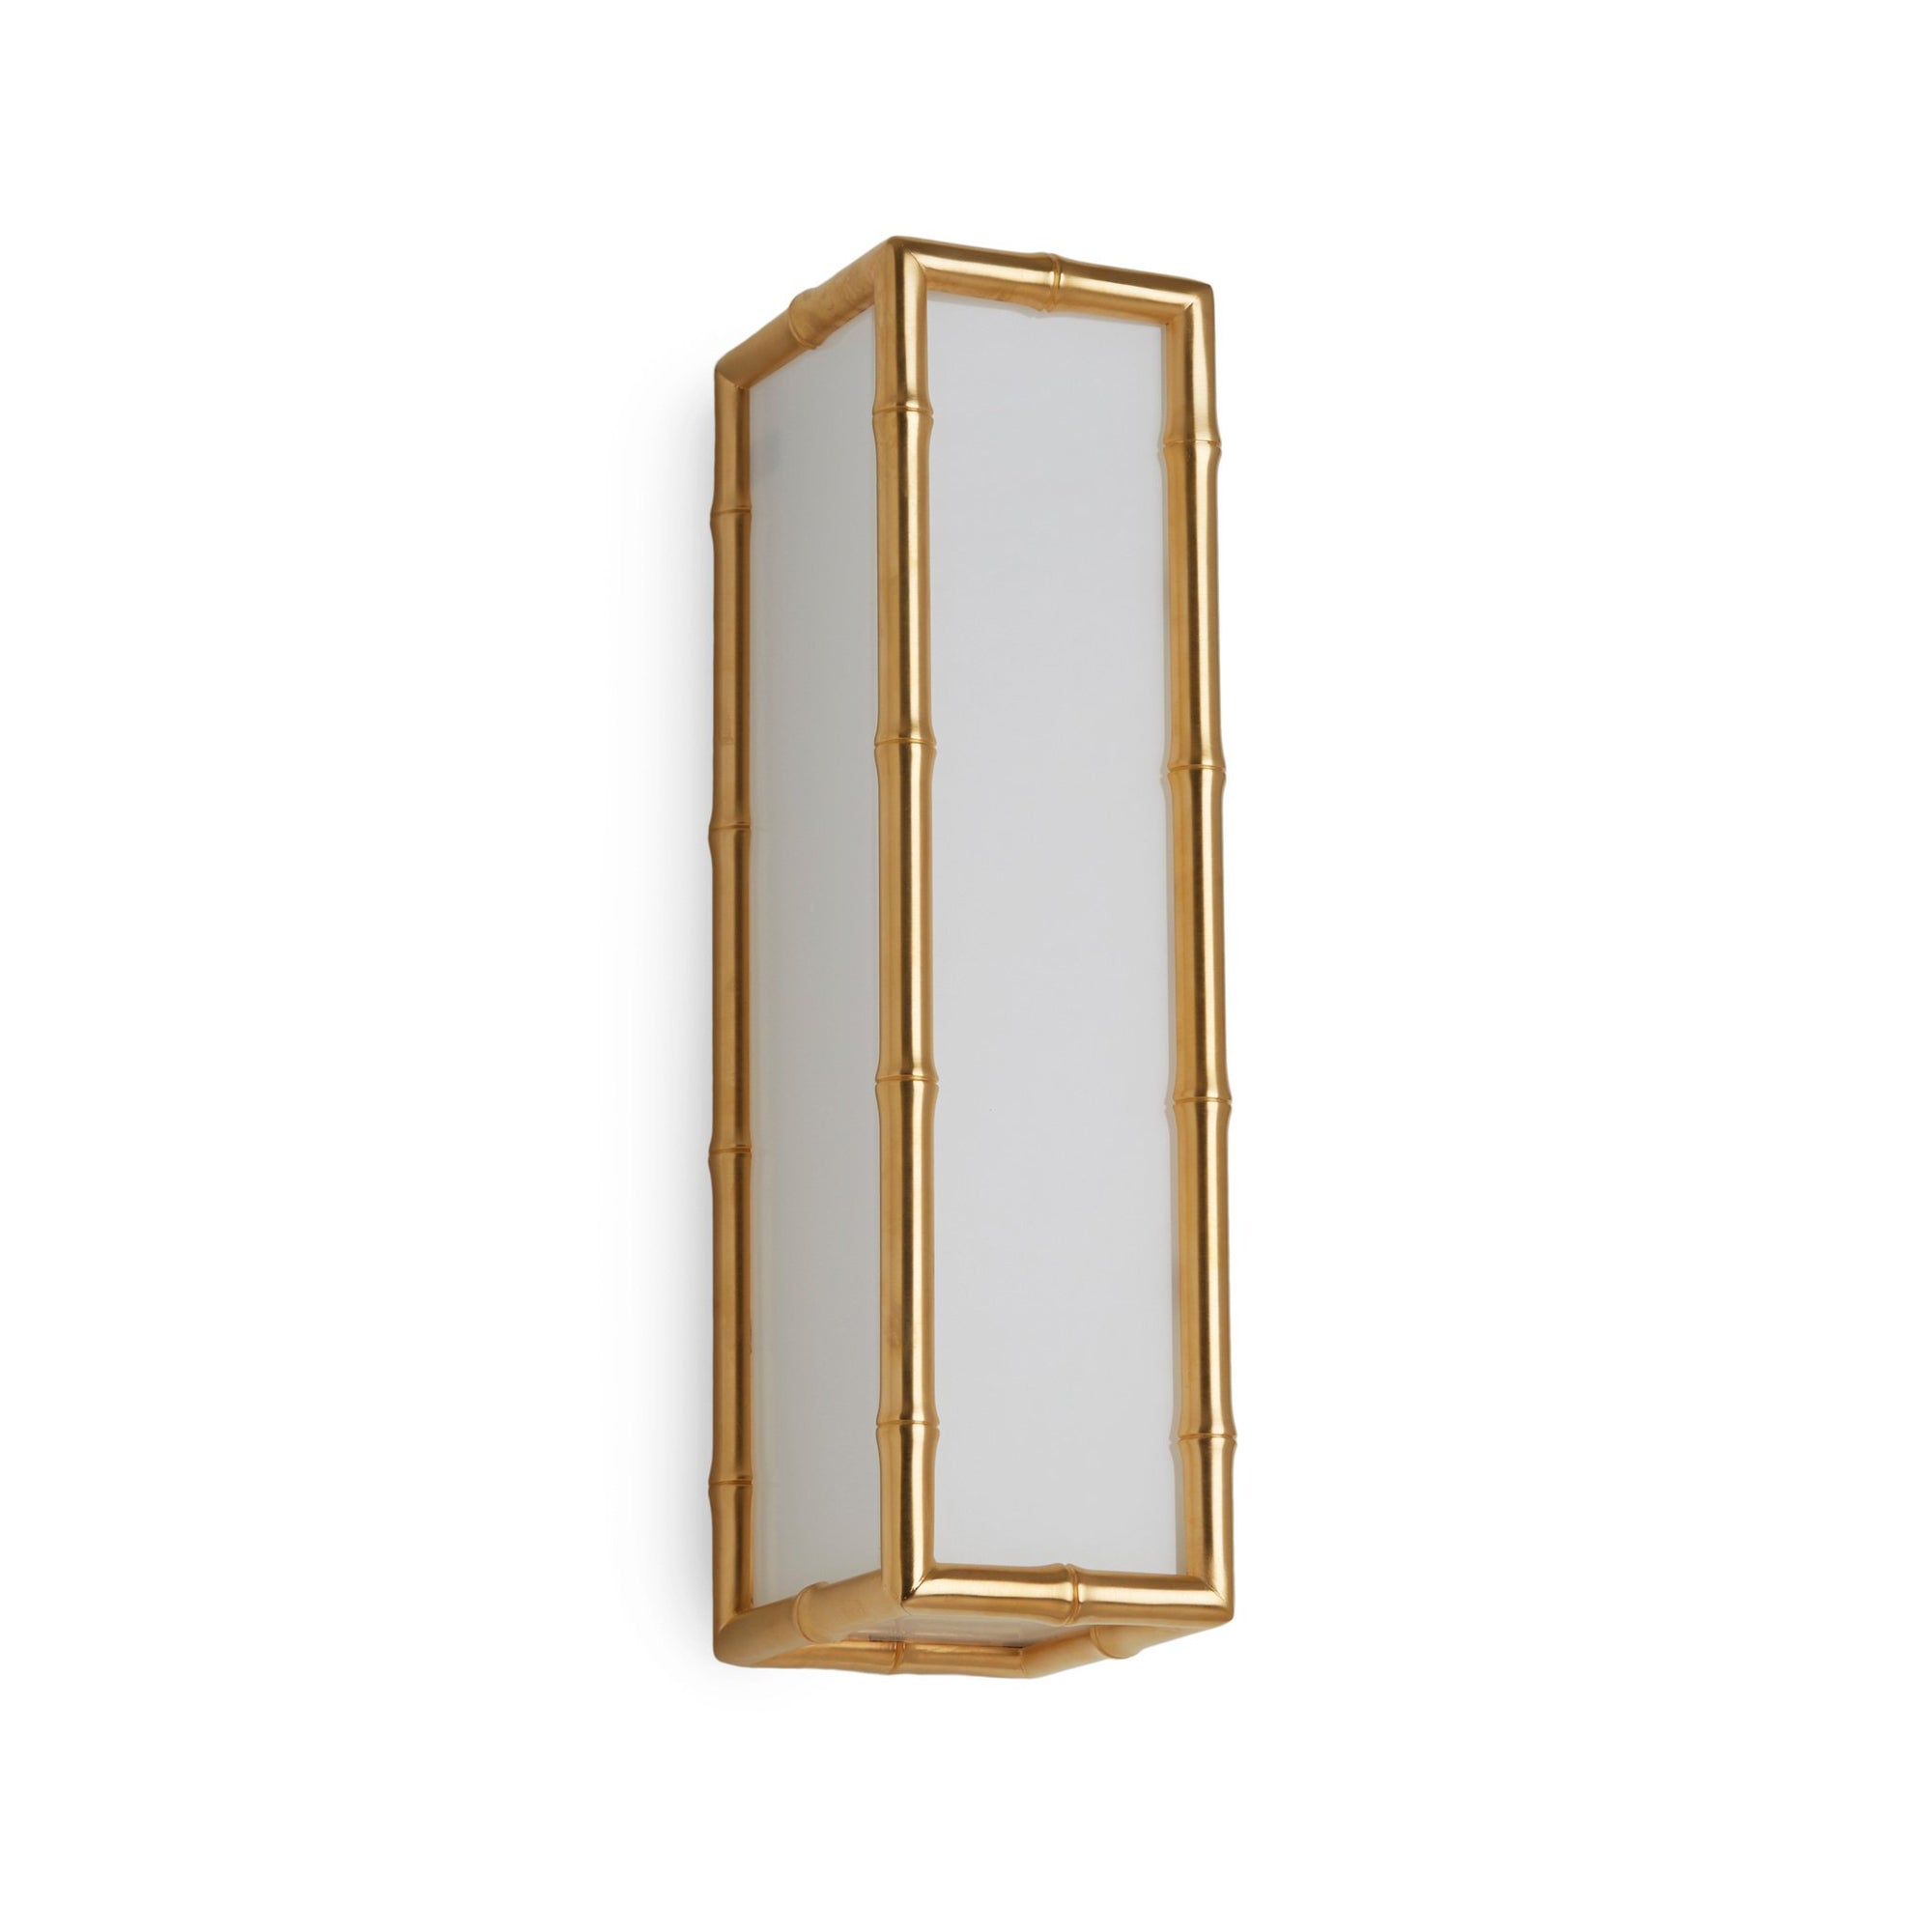 7151FG-16-VERT-GP Sherle Wagner International Bamboo Frosted Glass Panel Light in Gold Plate metal finish